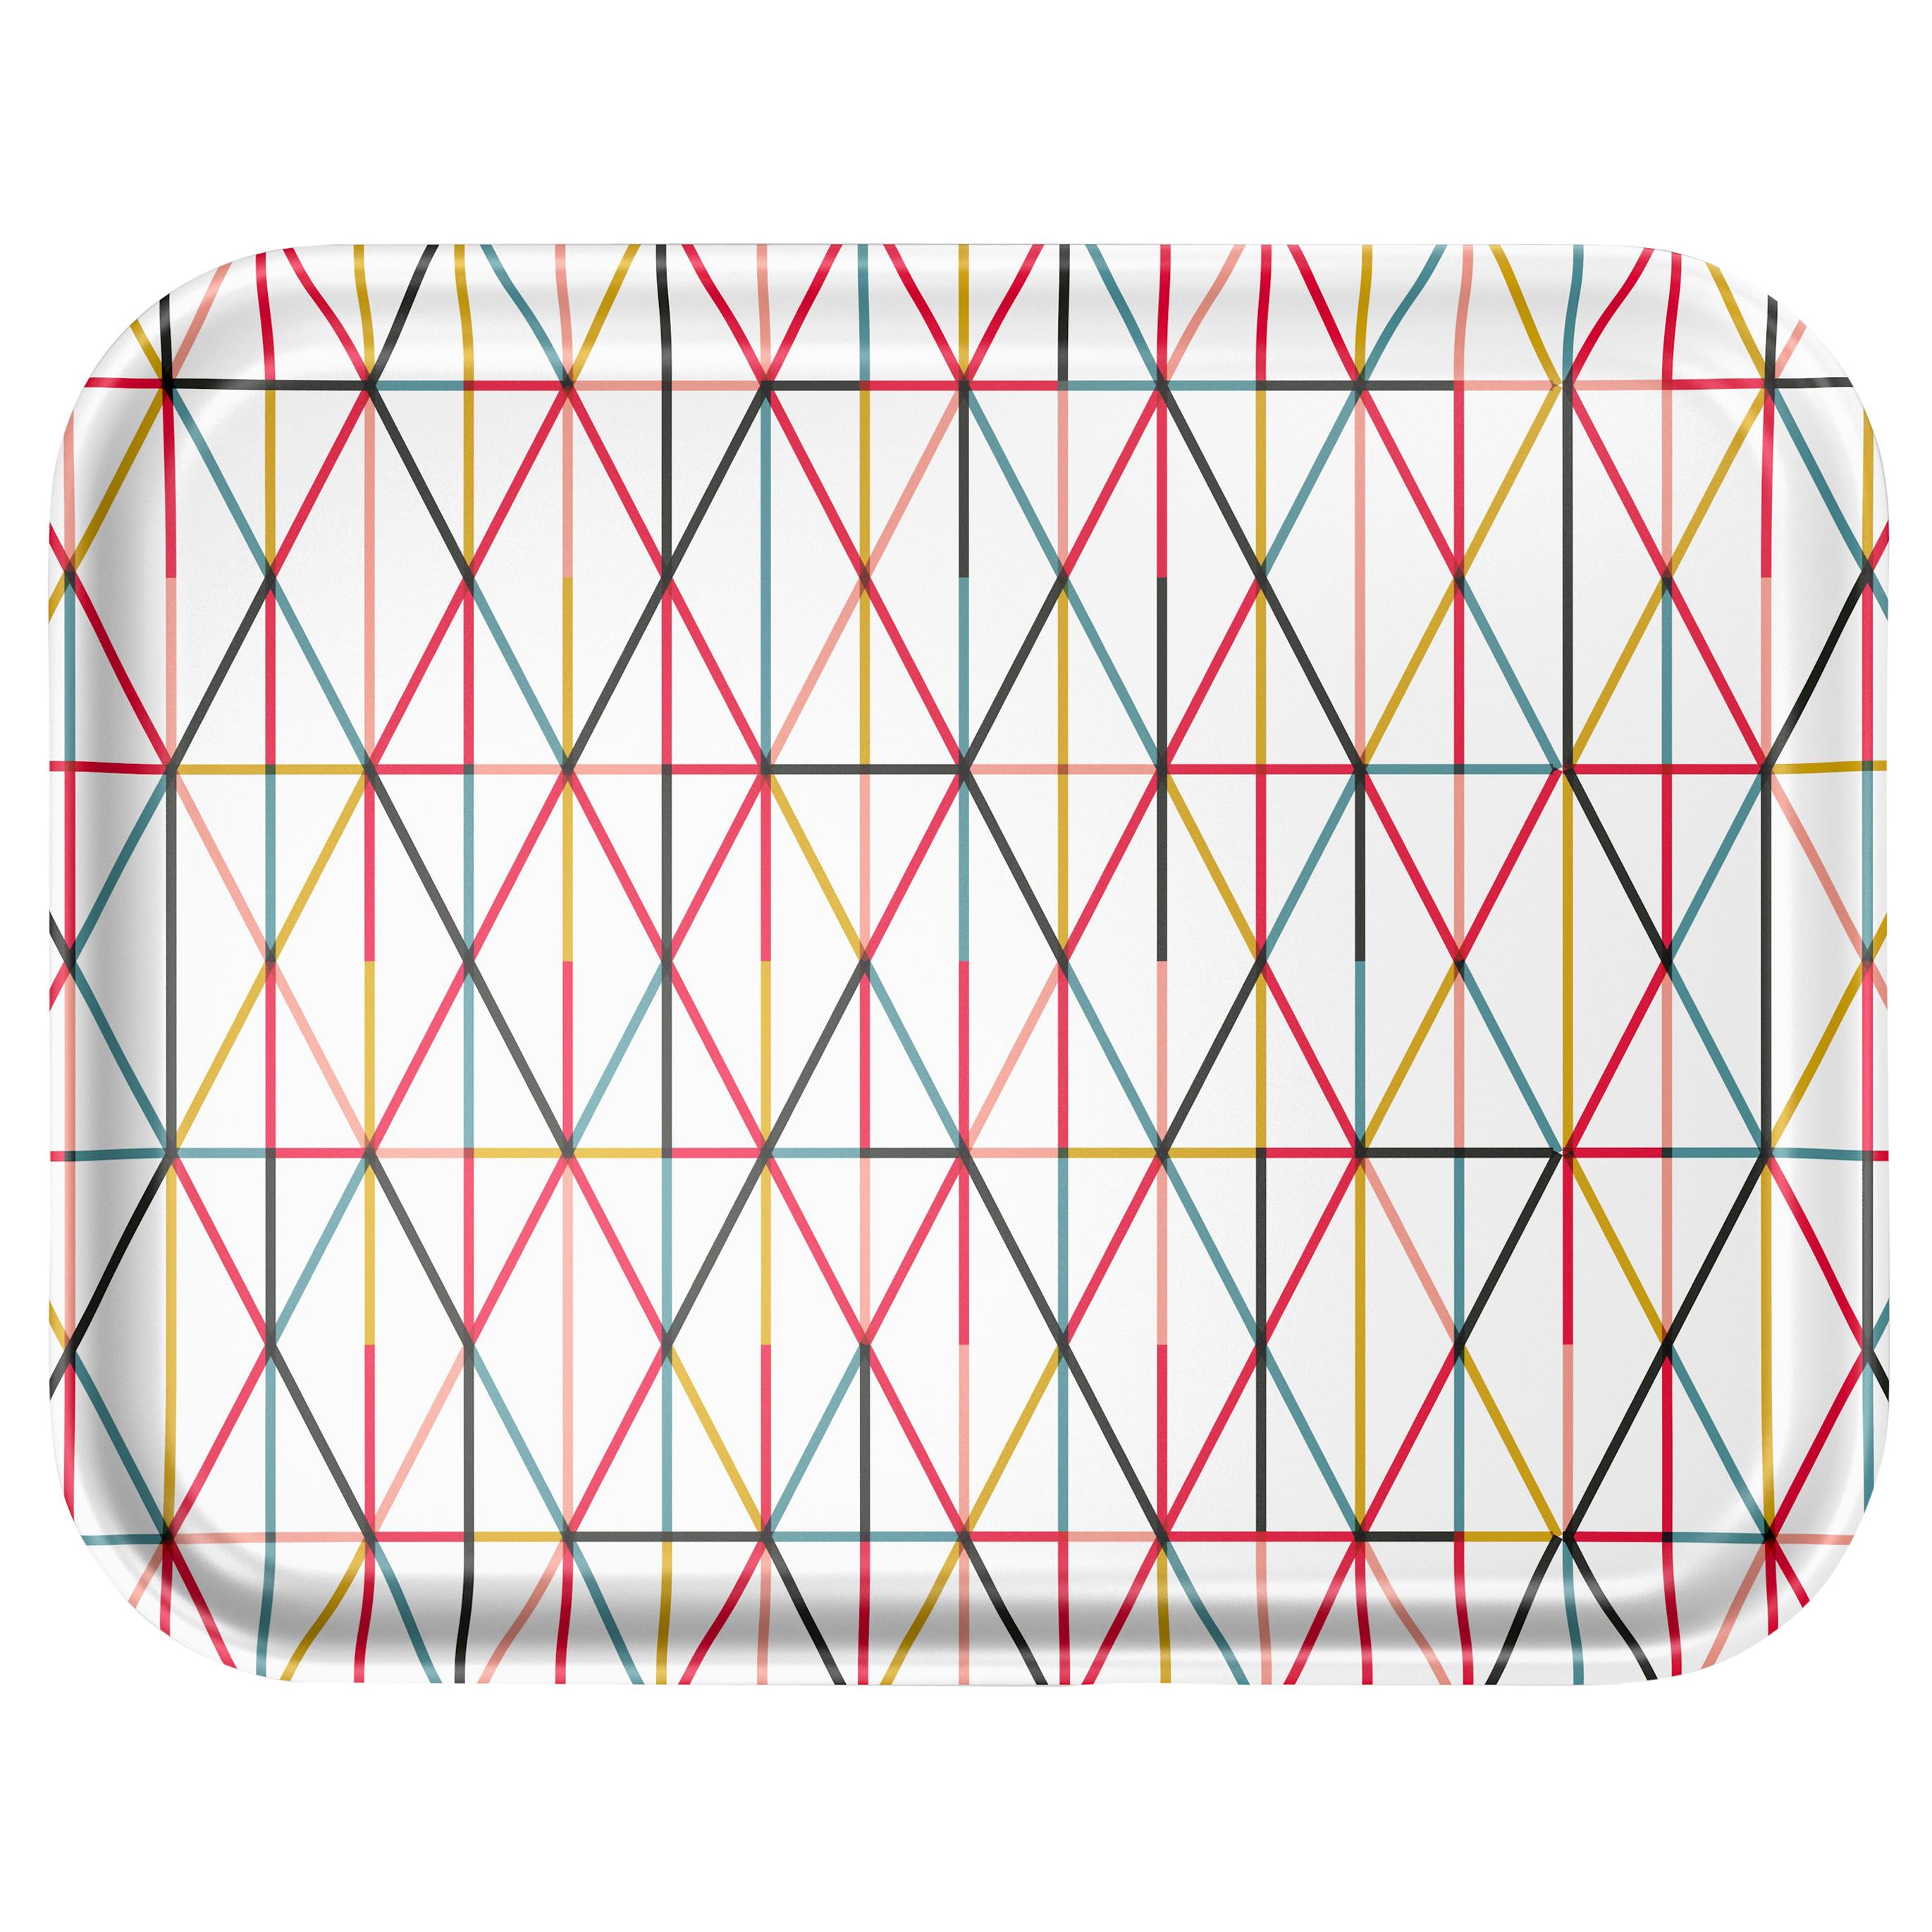 Vitra Large Classic Tray in Multicolor Grid Pattern by Alexander Girard im Angebot